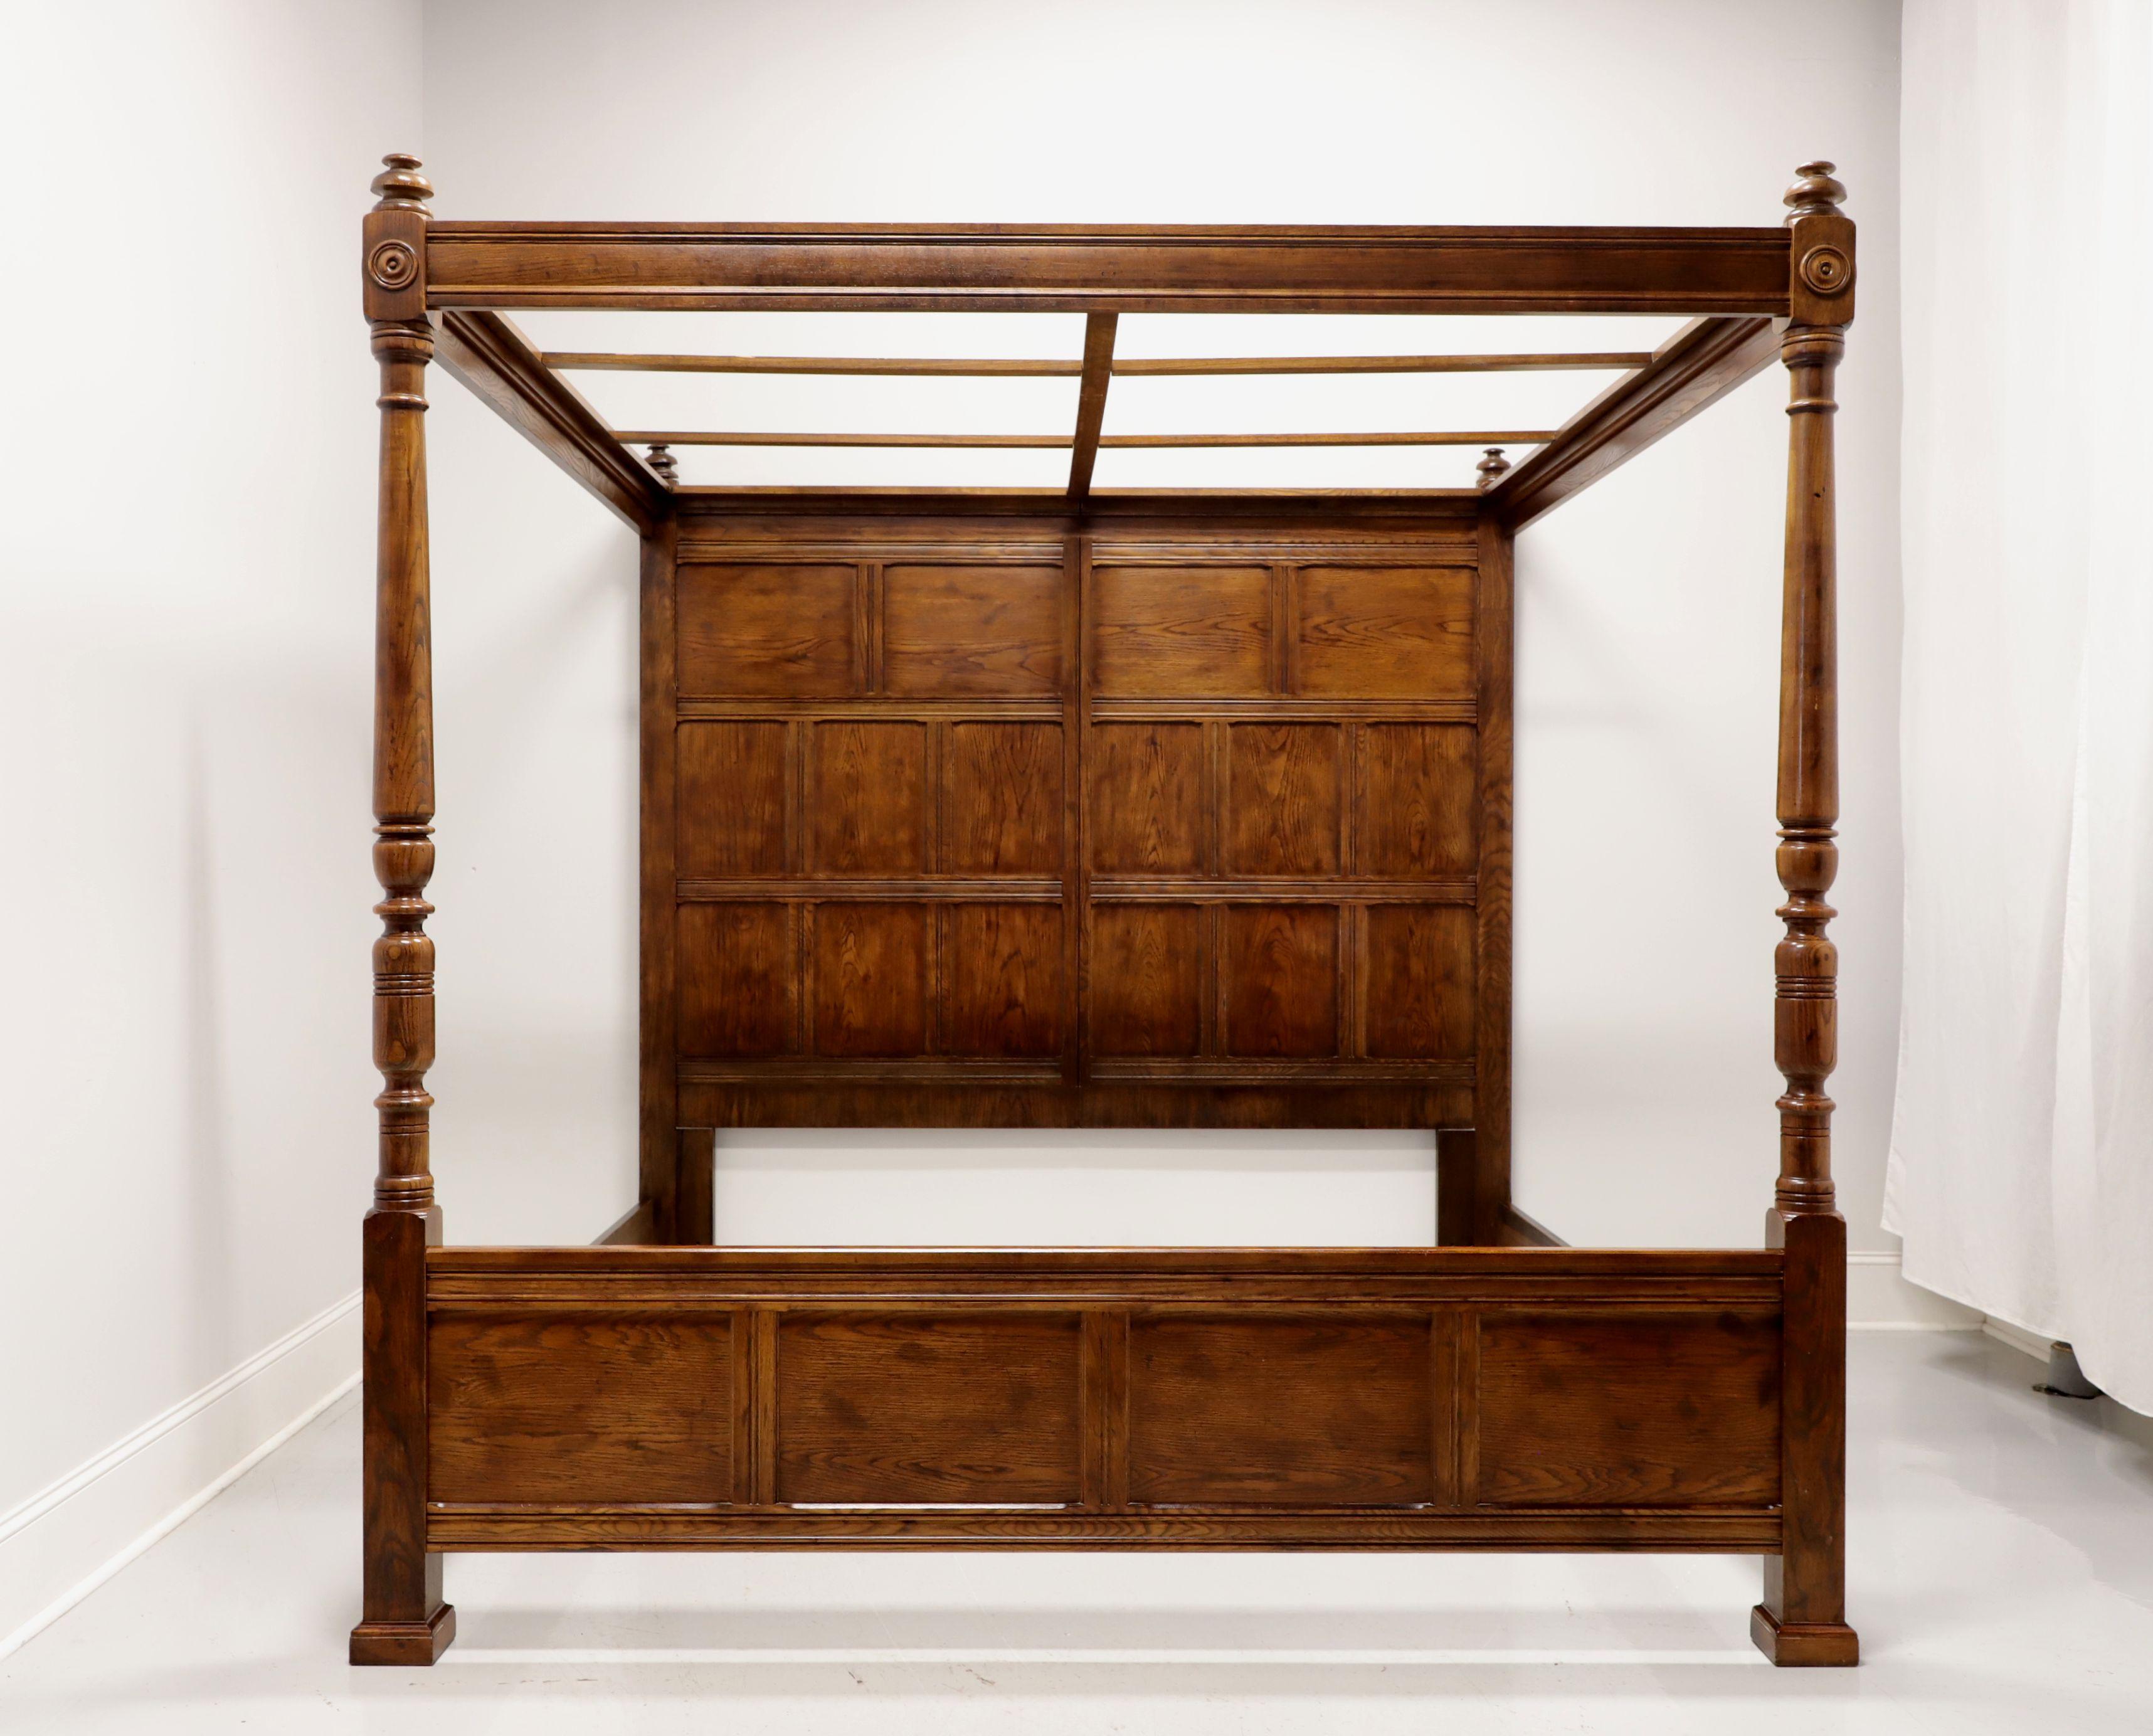 An English Tudor style king size four poster paneled bed with canopy by Henredon. Solid oak with paneled headboard, four turned posts capped by finials and a canopy. No mattress supports provided. Made in the USA, circa 1980's.

Measures: 83.5 W,